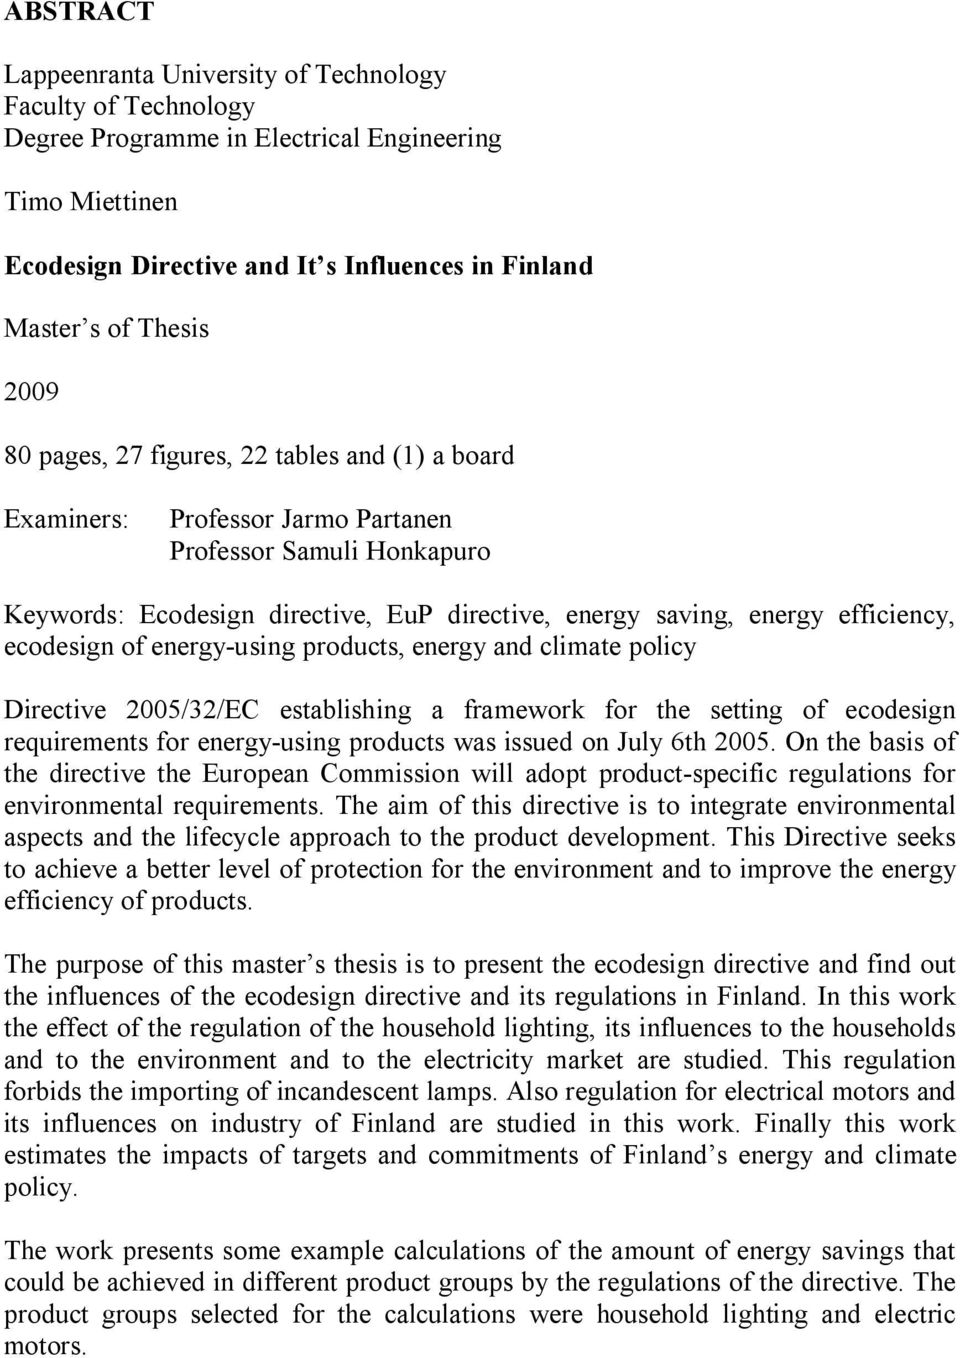 ecodesign of energy-using products, energy and climate policy Directive 2005/32/EC establishing a framework for the setting of ecodesign requirements for energy-using products was issued on July 6th